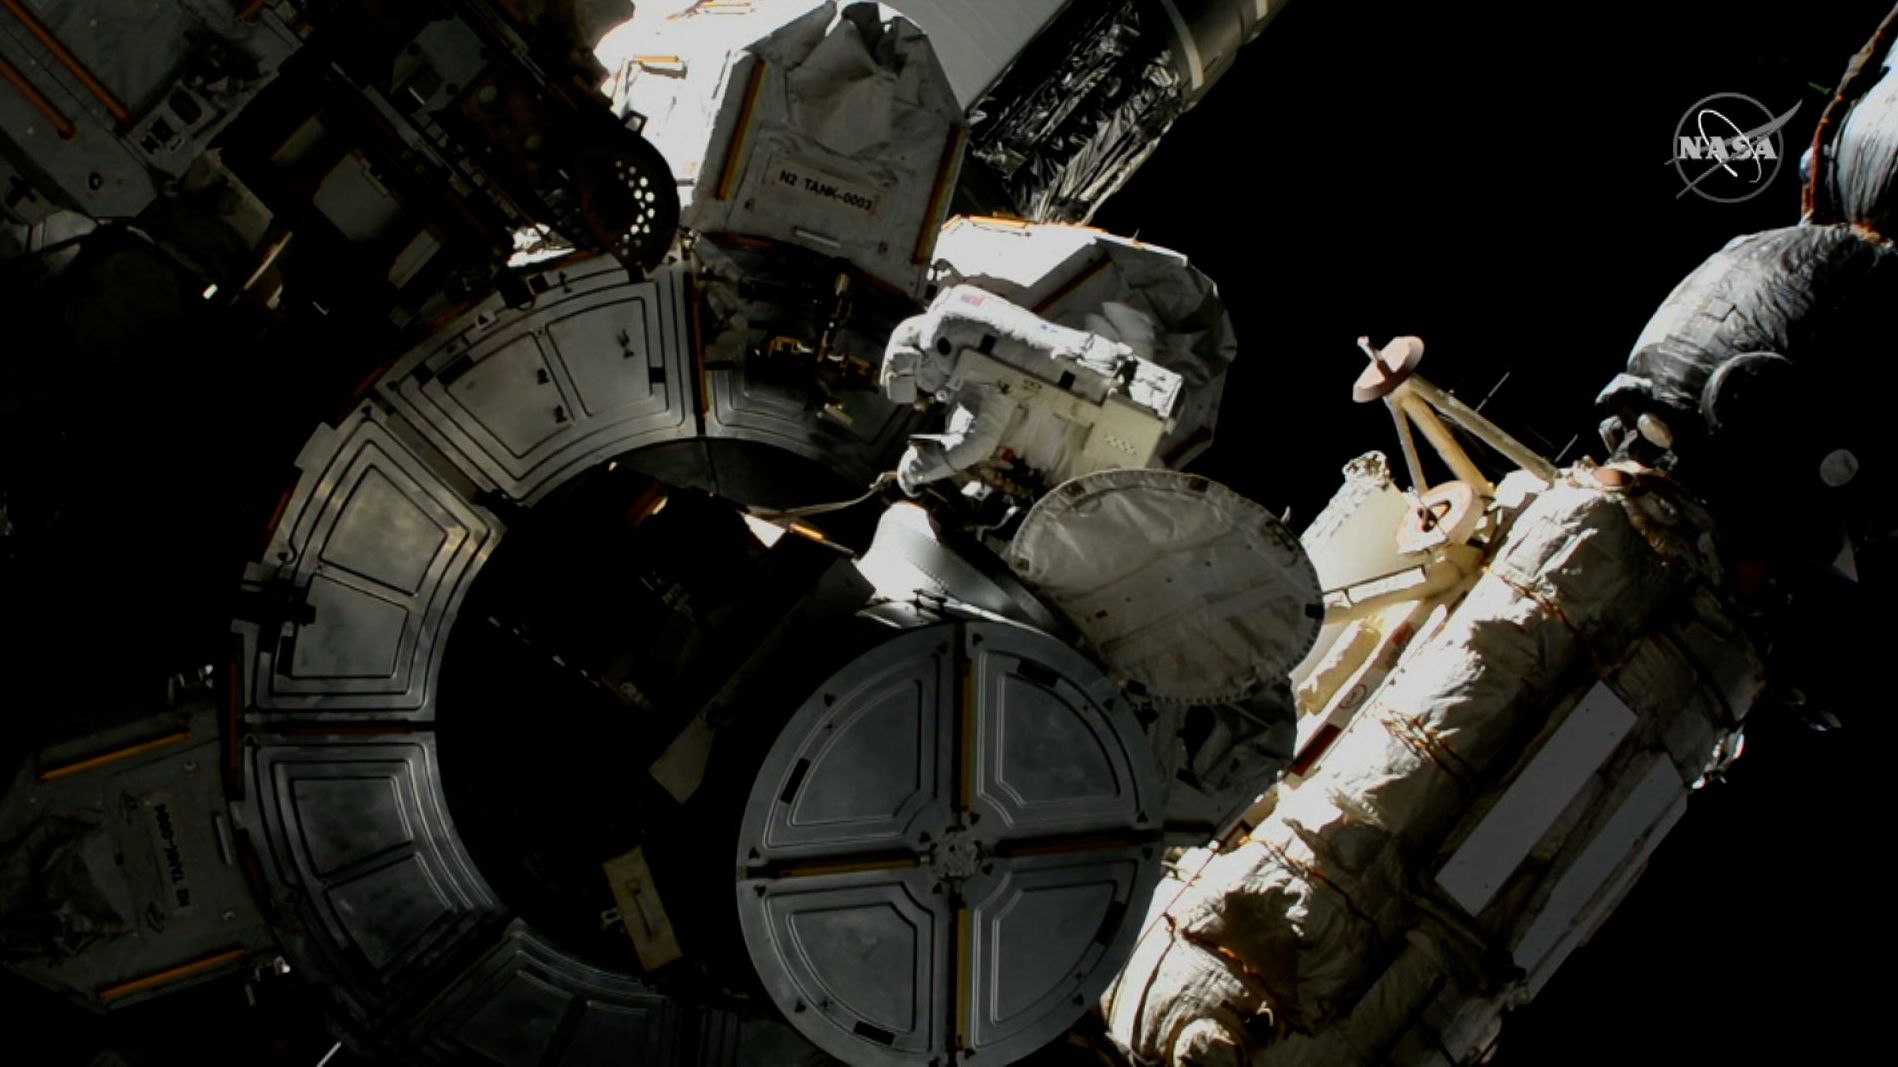 The spacewalk conducted March 13 was the 237th spacewalk overall in support of the space station.